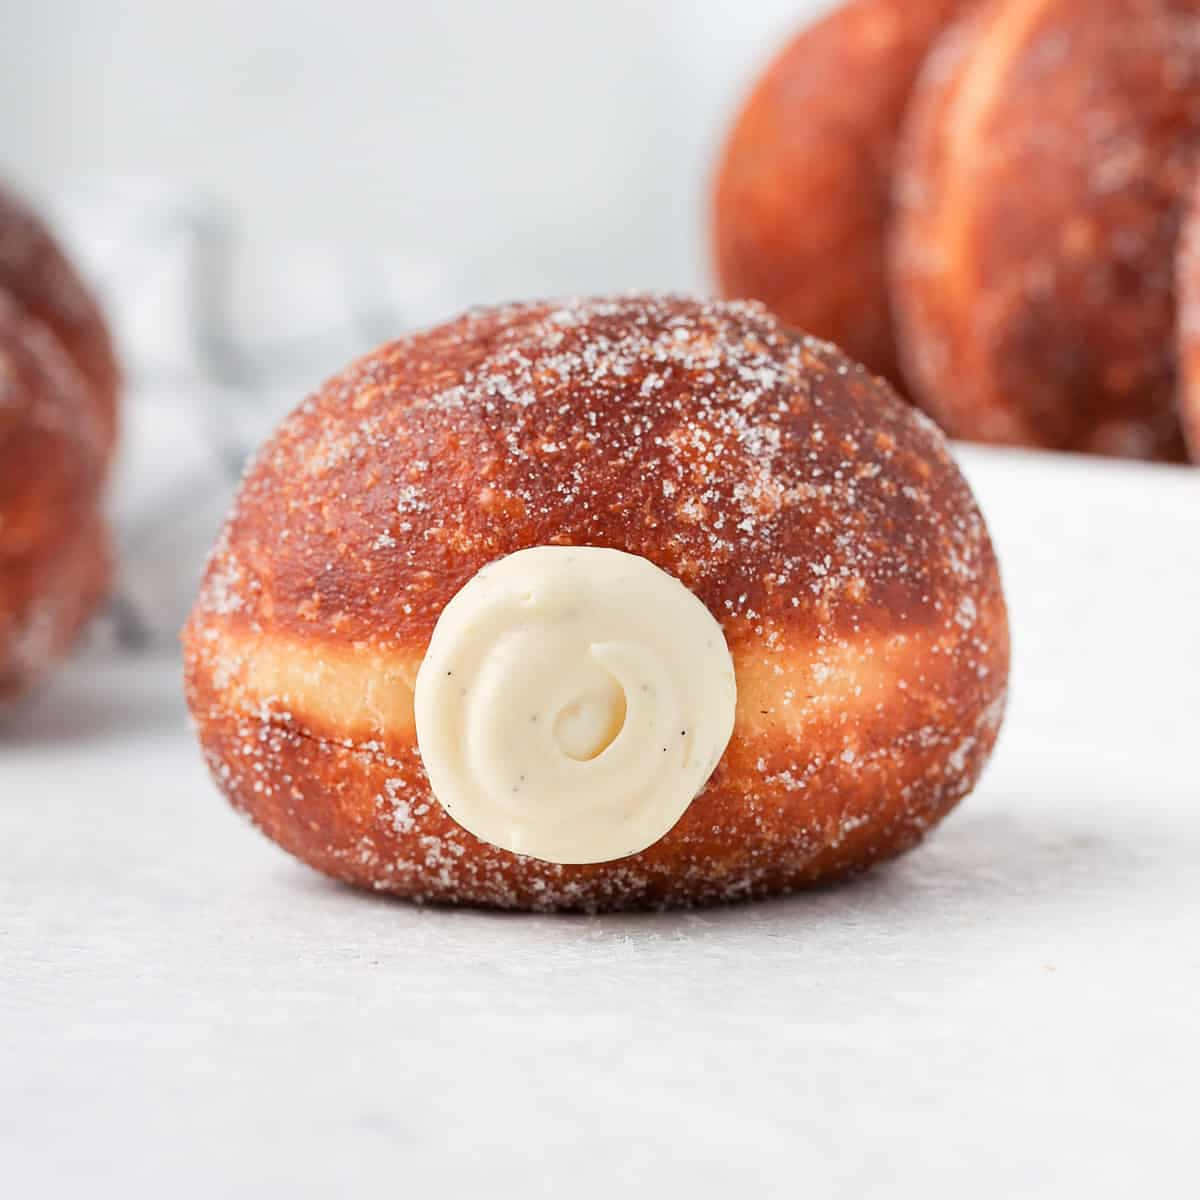 Tempting Delicious Donuts - Make Every Day a Treat!